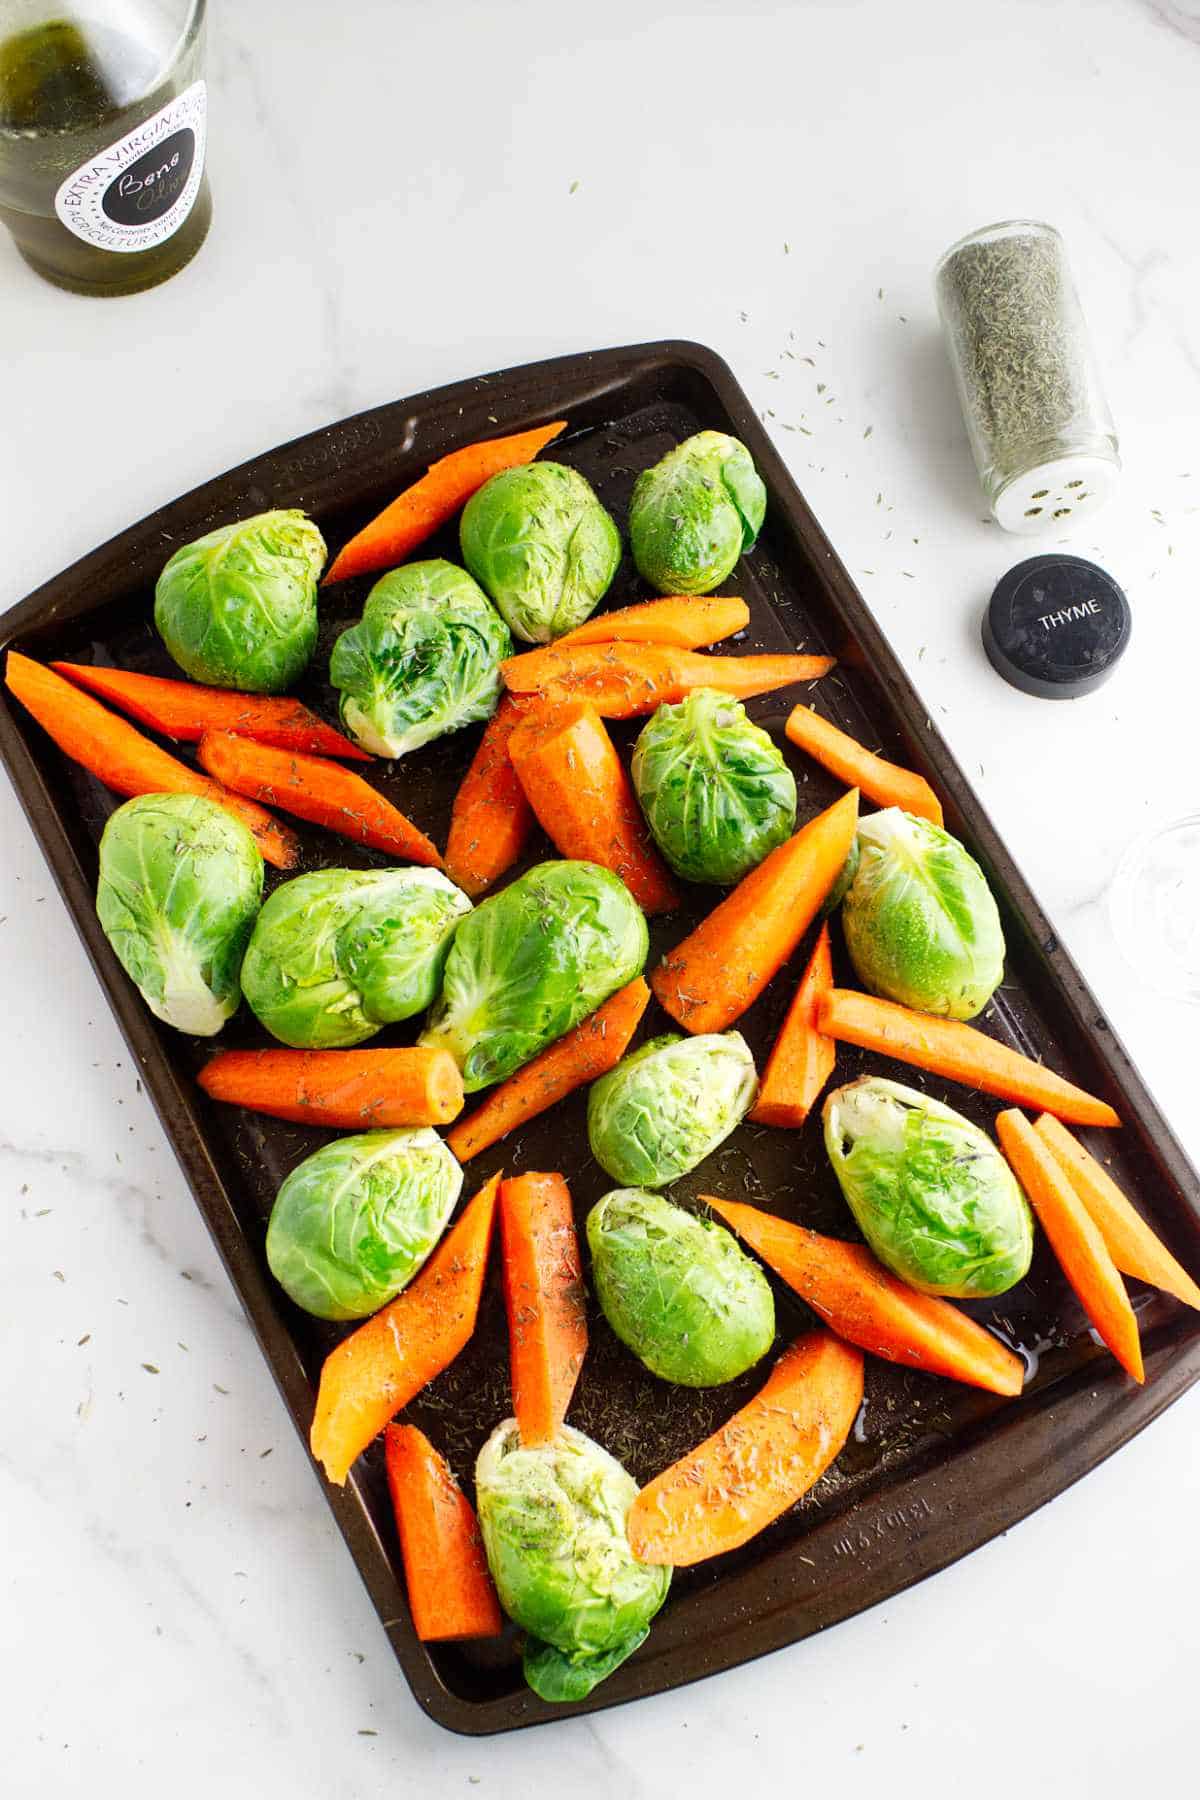 Sheet pan of seasoned carrots and brussels sprouts.